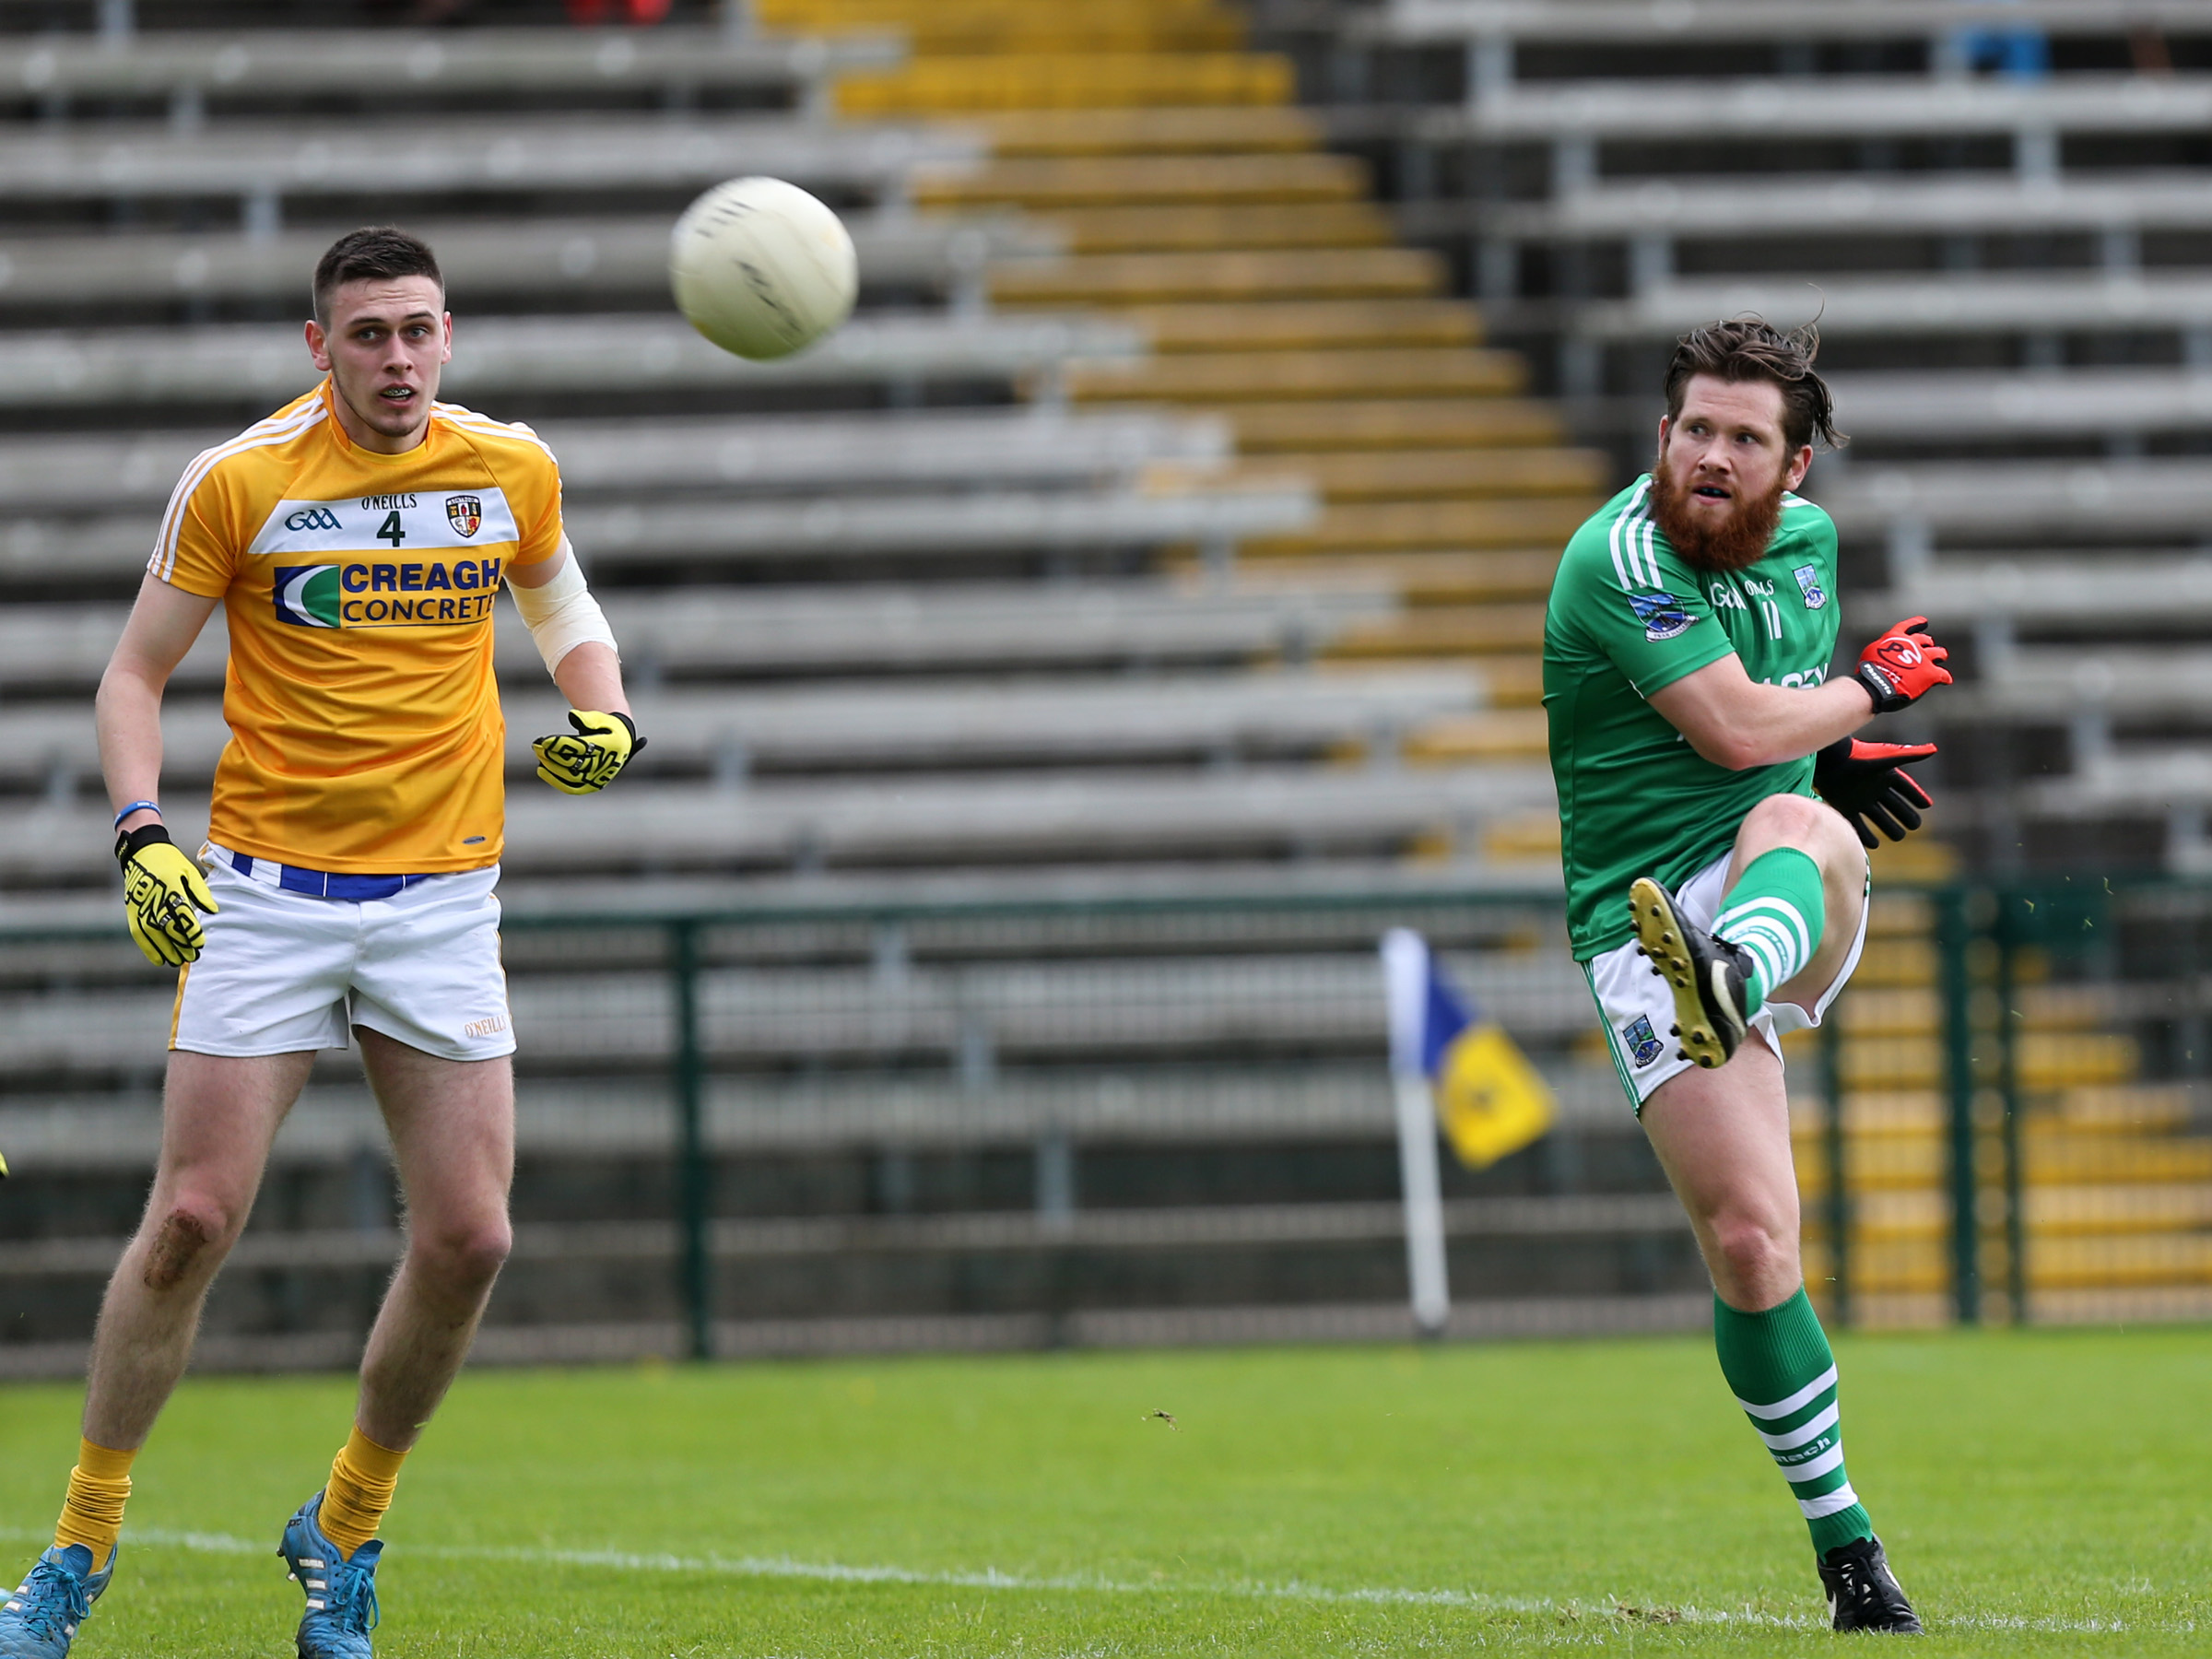 Despite two wins from two in Division Four, Antrim defender Connor Burke insists the Saffrons must improve for their next outing against Leitrim